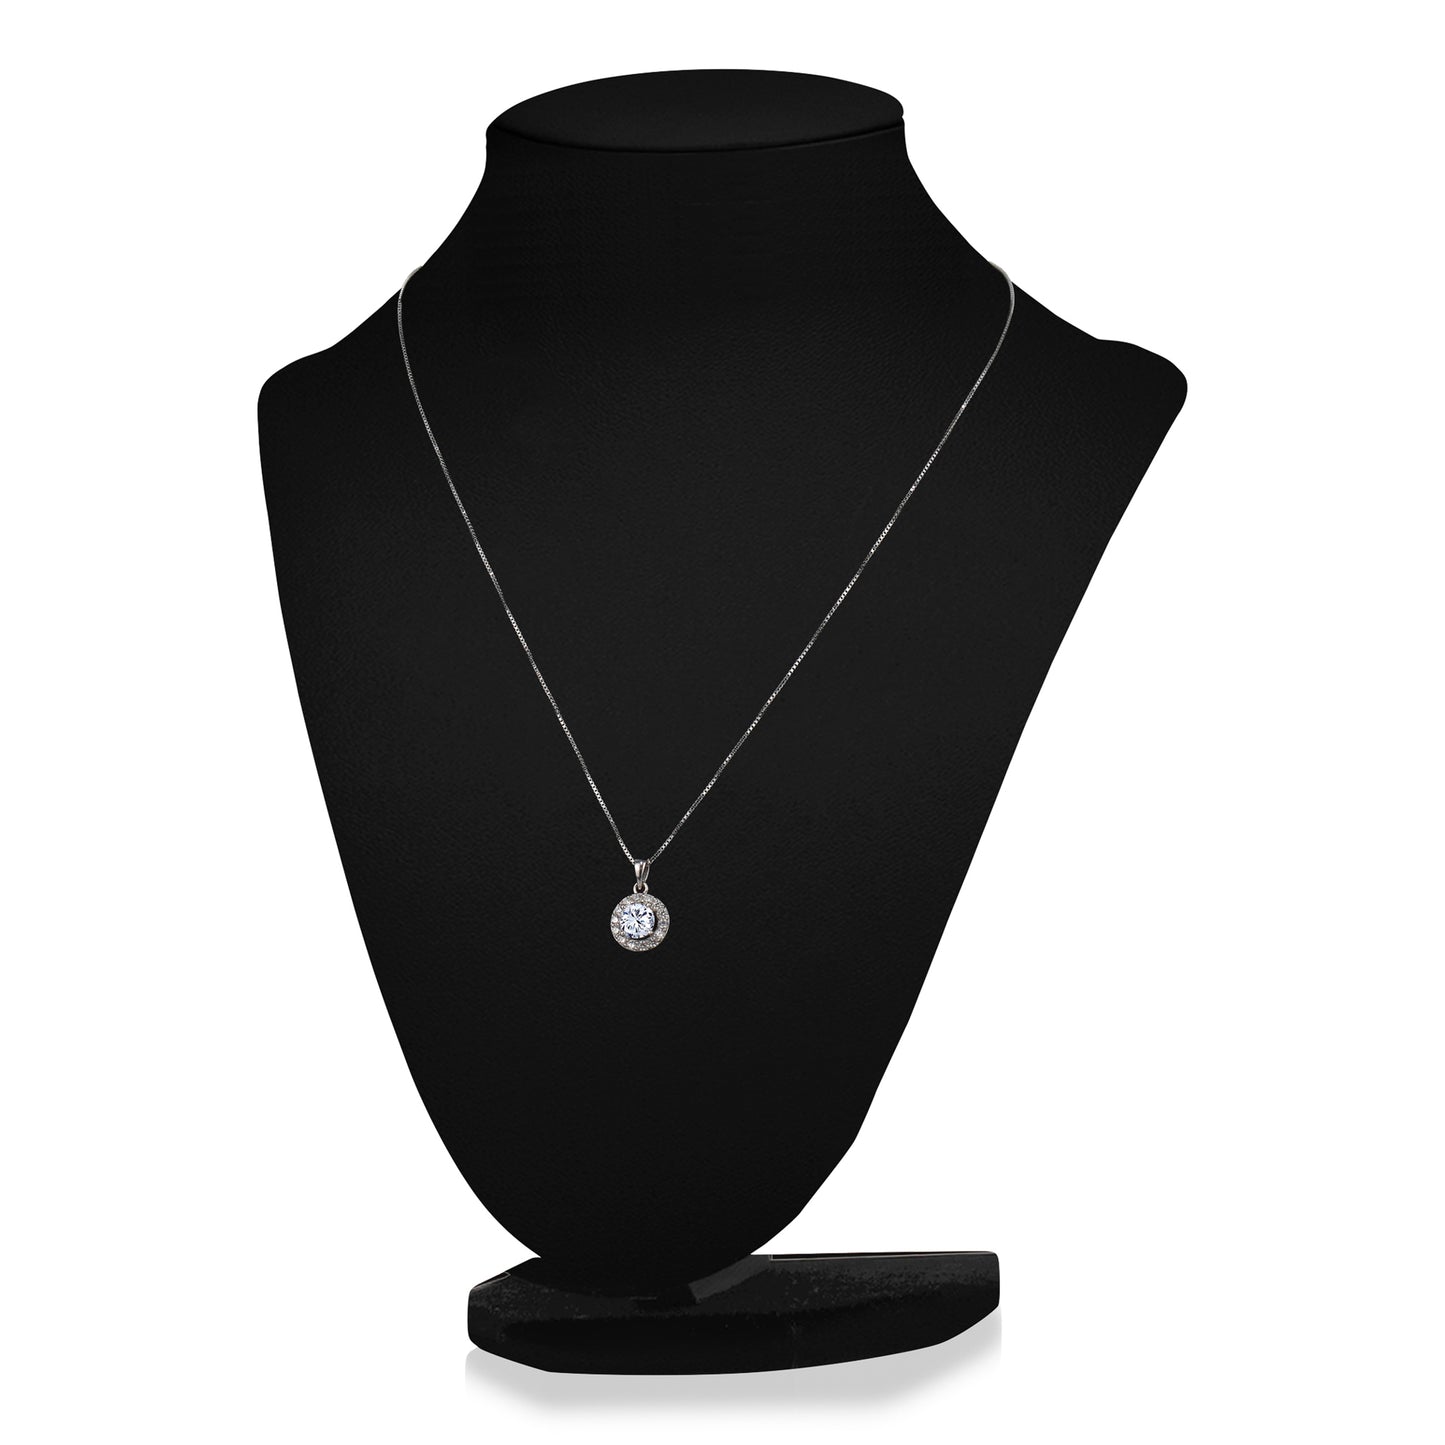 5A Cubic Zirconia Round Necklace and Halo Drop Earrings Set